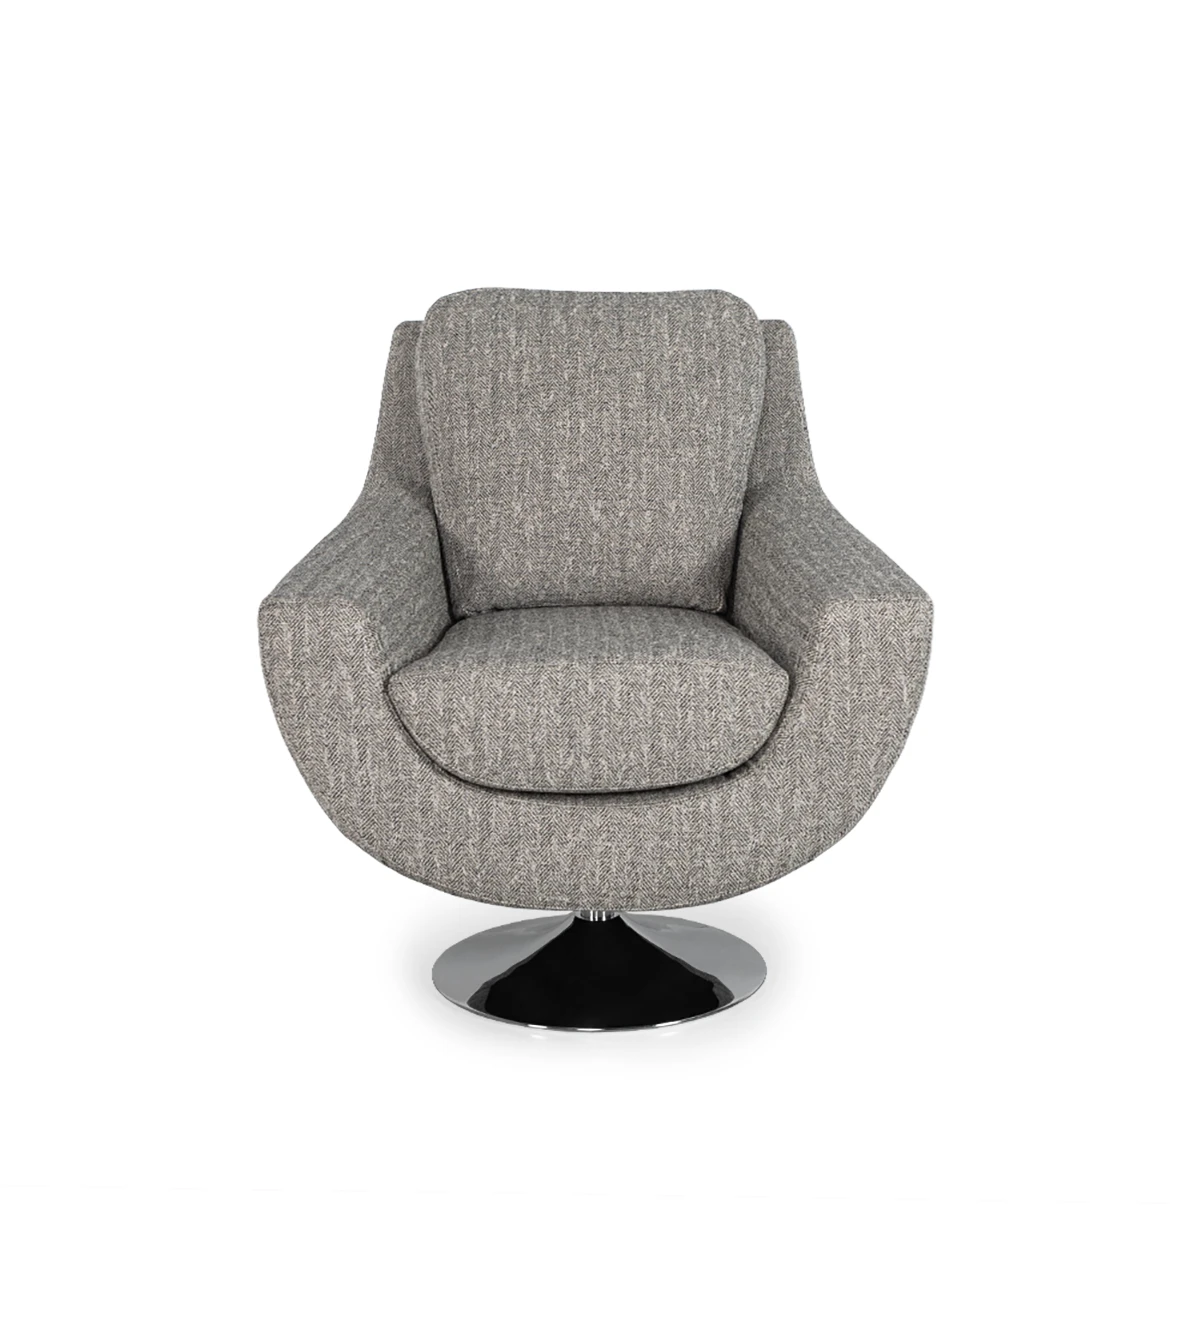 Amrchair upholstered in fabric with swivel base.